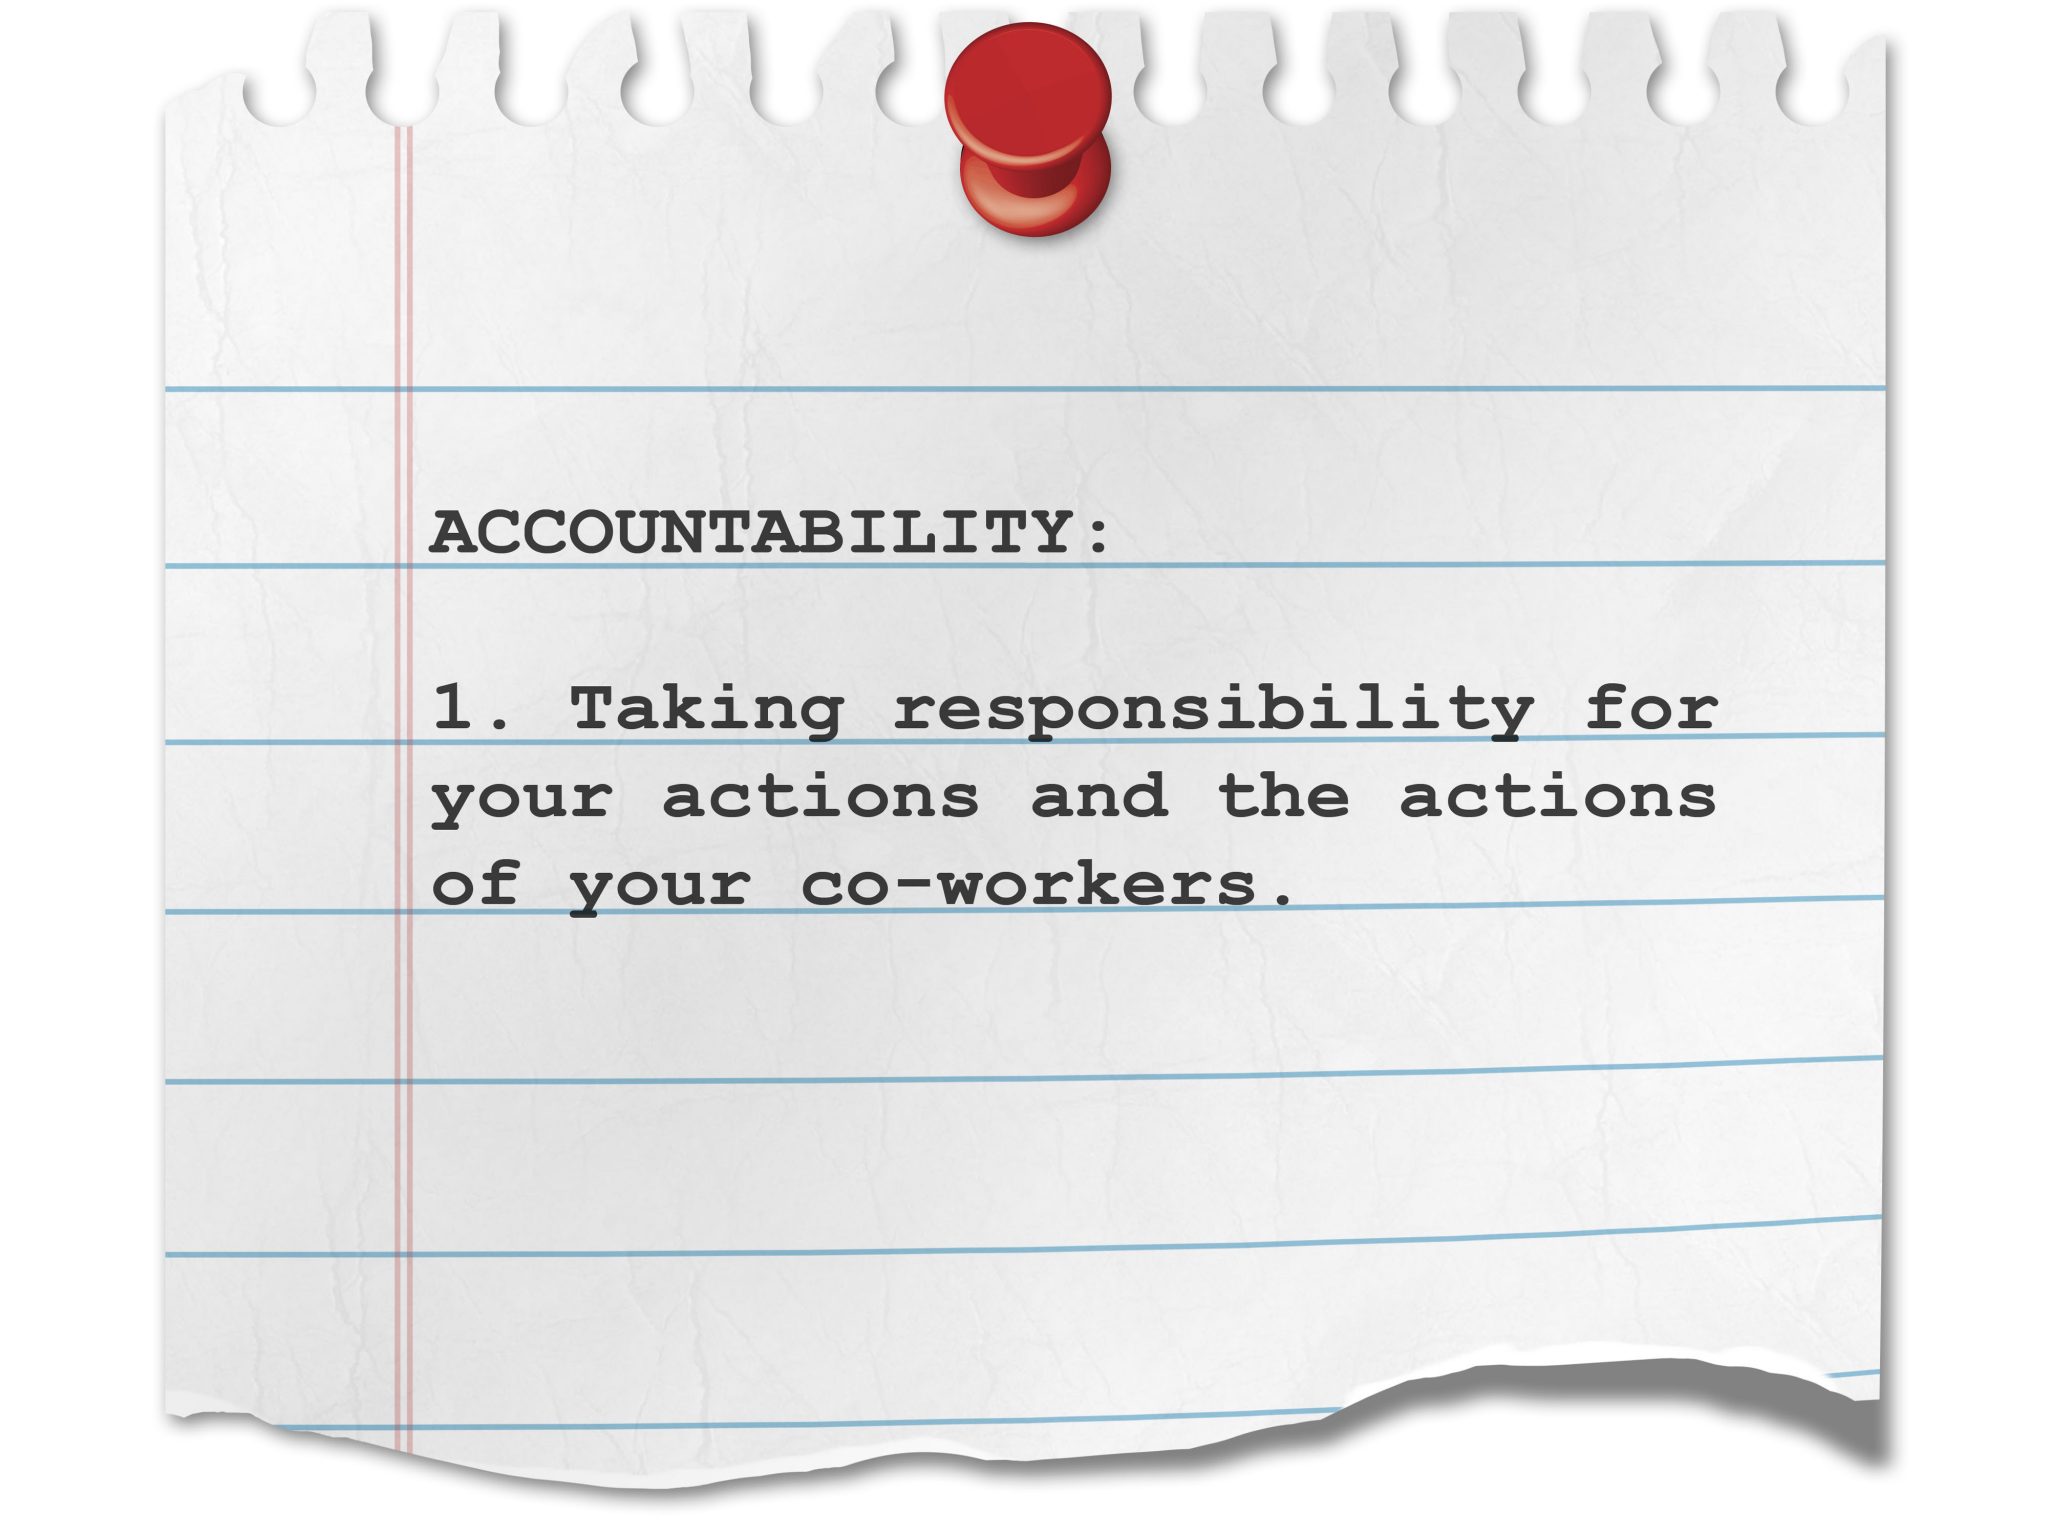 taking responsibility for your actions and the actions of your co-workers